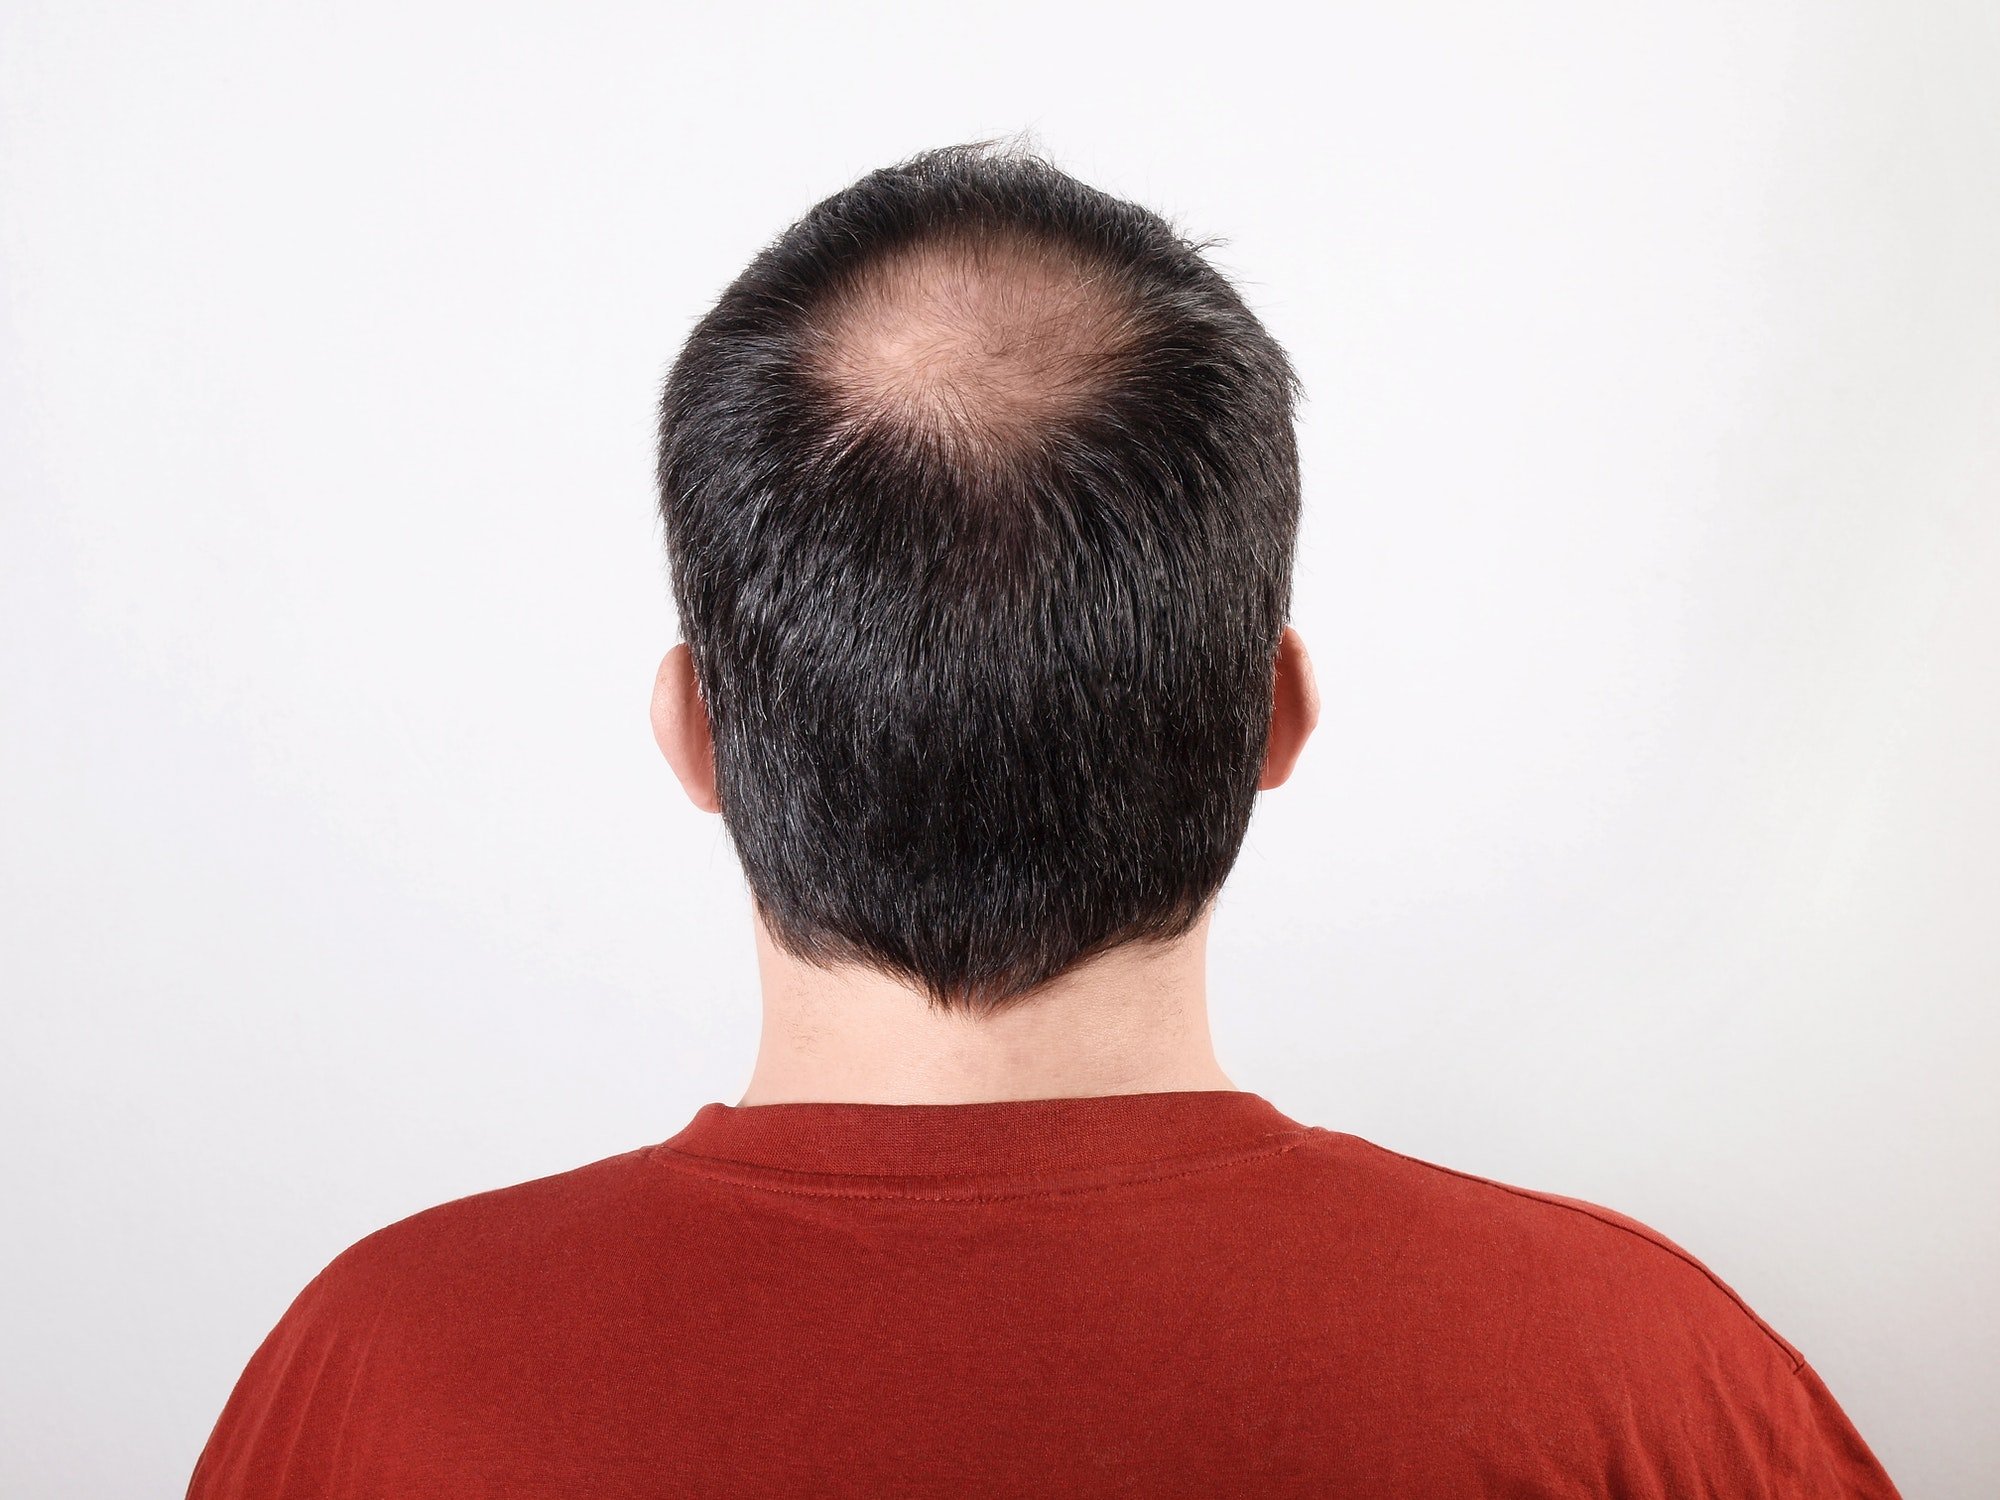 Hair loss - which really helps. Man with thinning hair or alopecia or hair loss